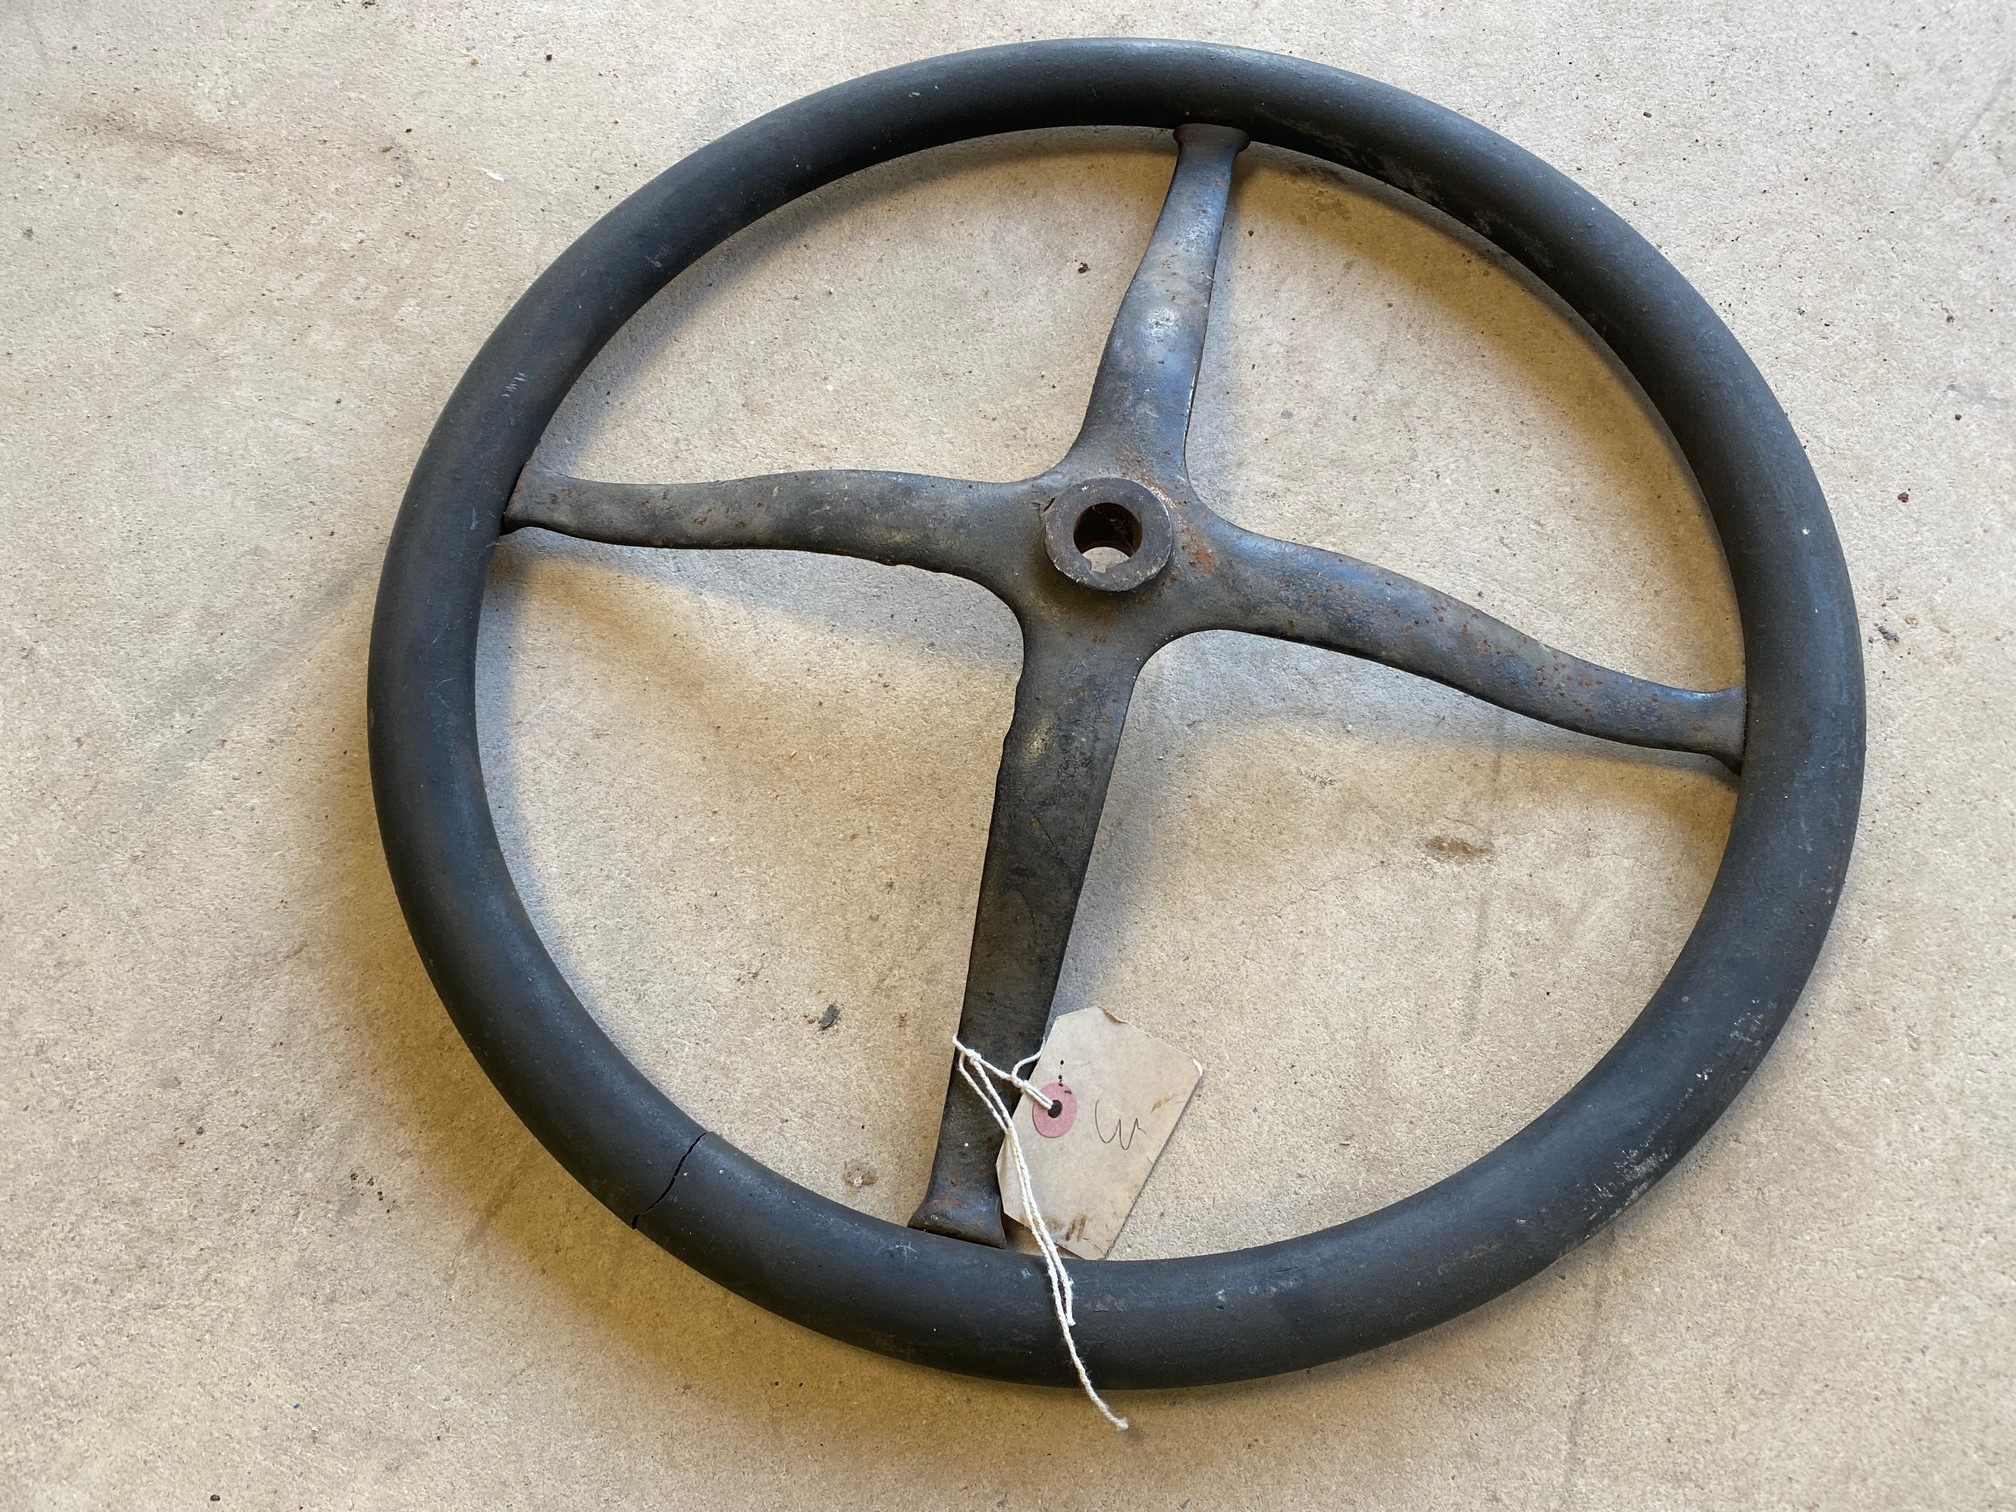 An original Ford Model T steering wheel, fully stamped Ford T-902-D2 A. - Image 2 of 3